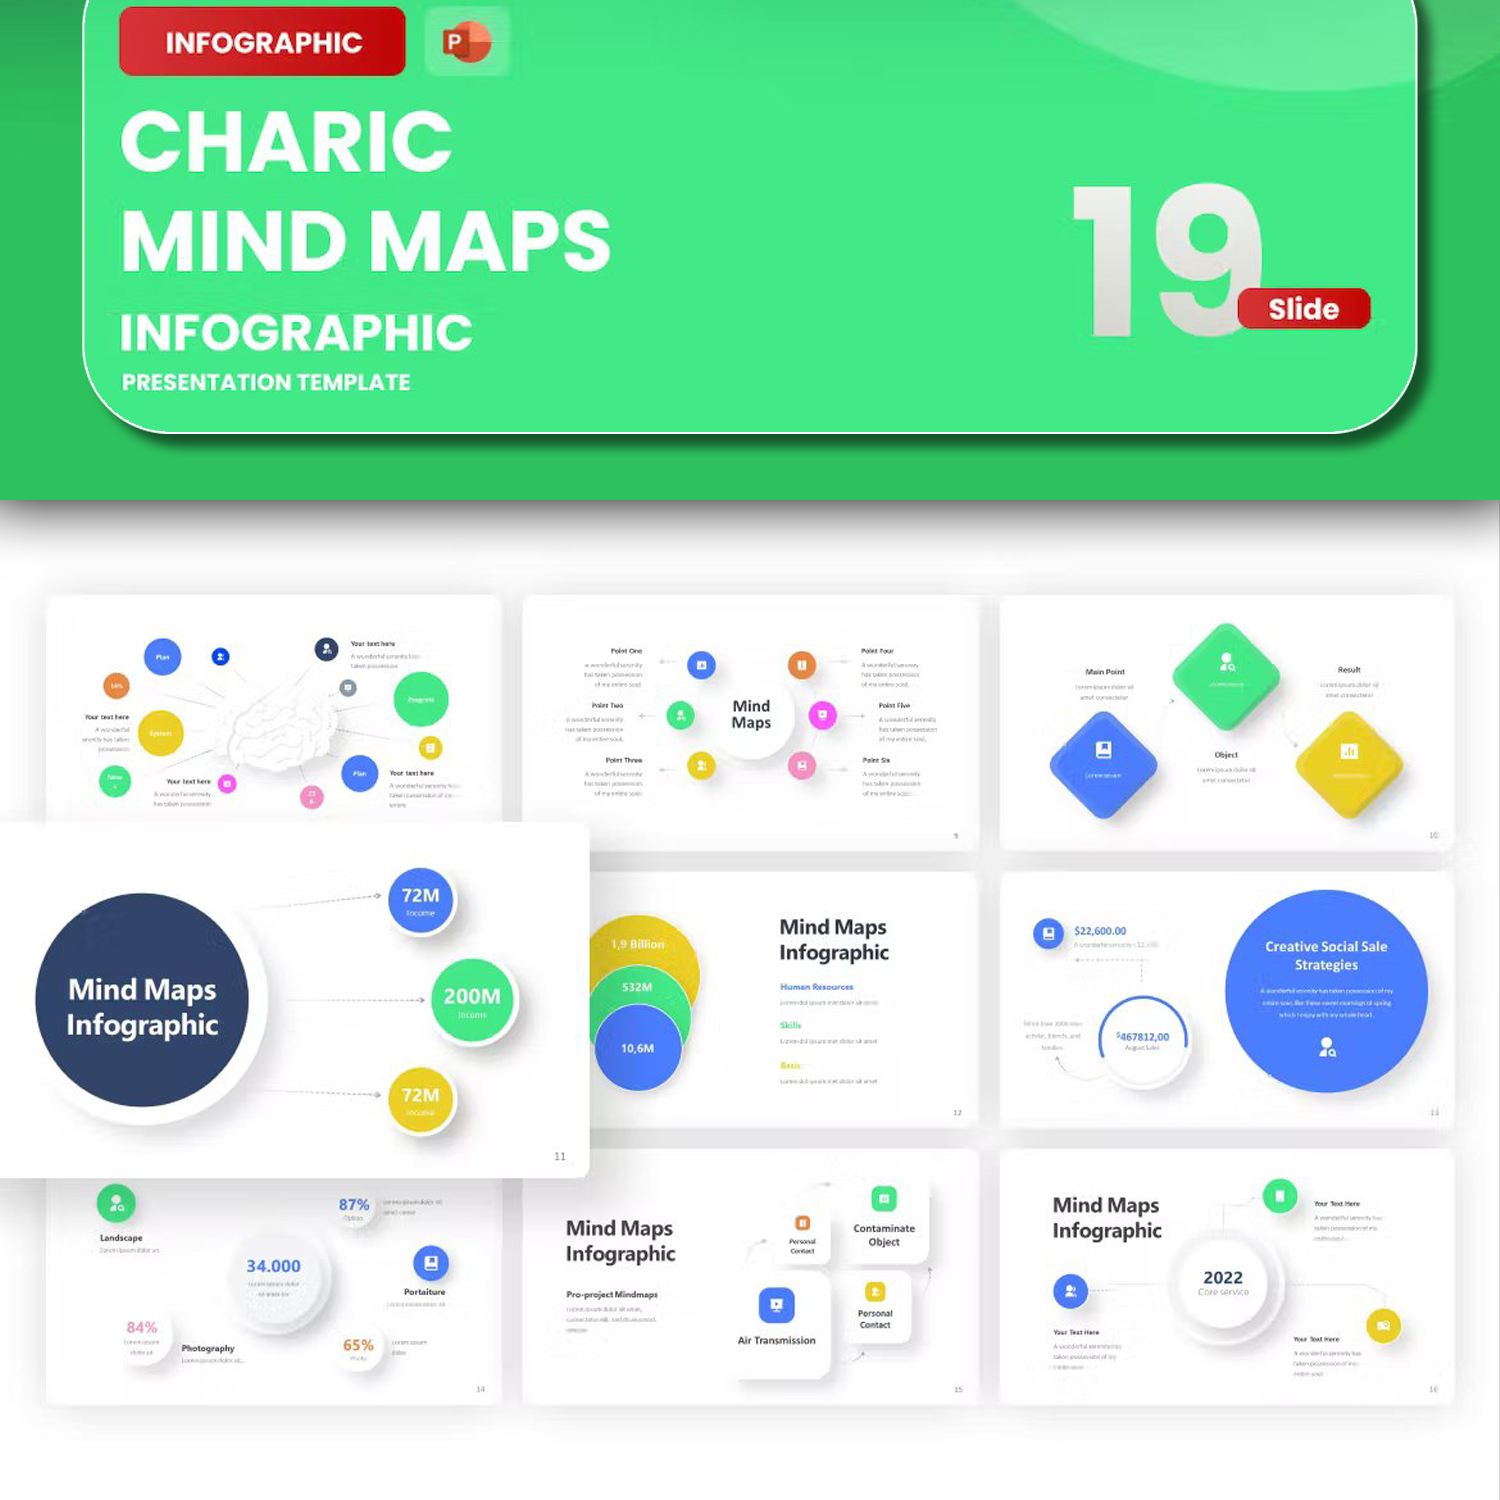 Slides with information of mind maps infographic.